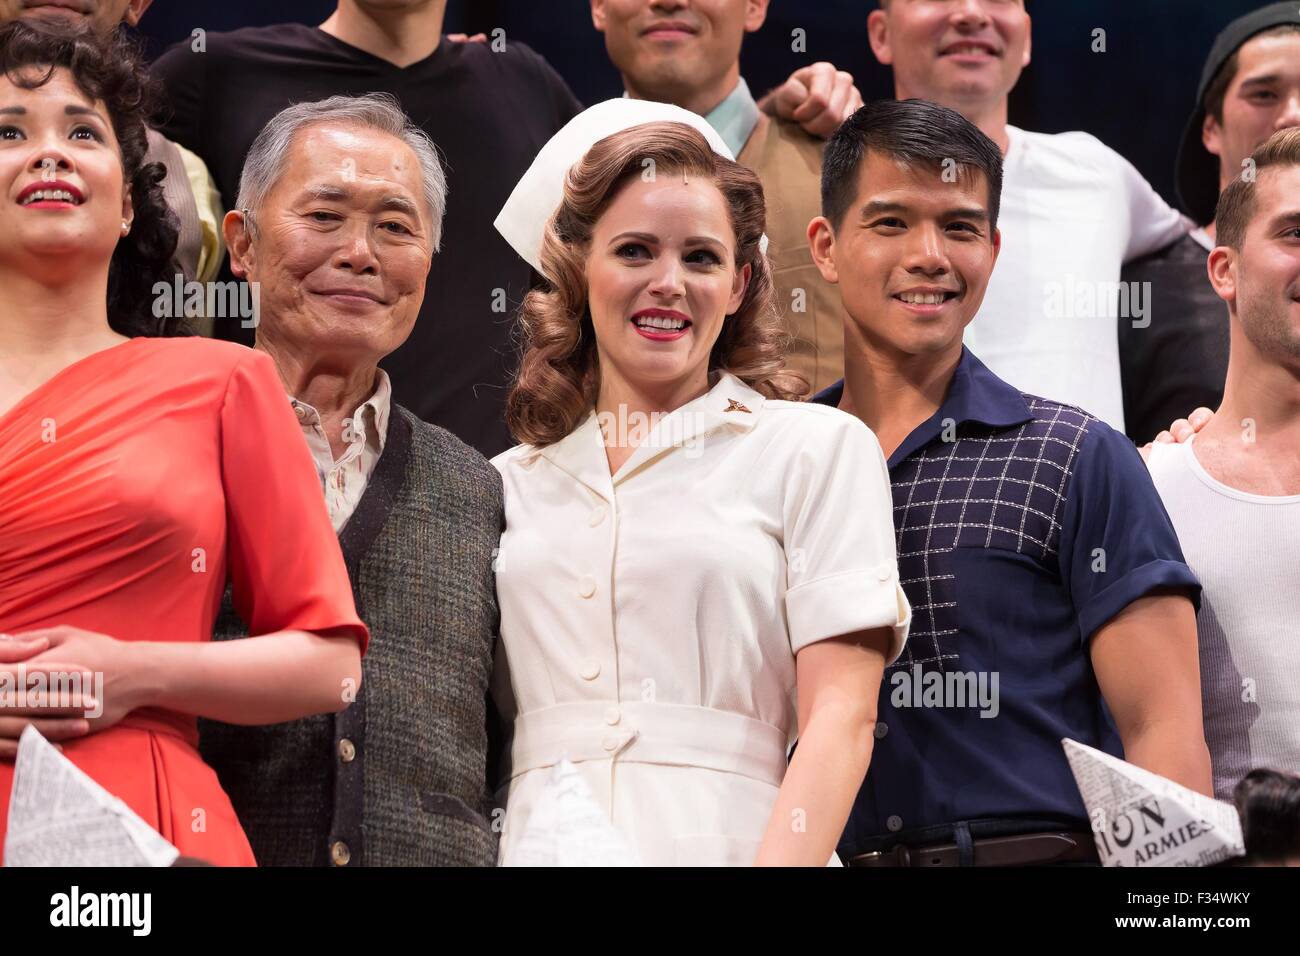 New York, NY, USA. 29th Sep, 2015. Lea Salonga, George Takei, Katie Rose Clarke, Telly Leung in attendance for ALLEGIANCE Cast Meets The Press, The Longacre Theatre, New York, NY September 29, 2015. Credit:  Jason Smith/Everett Collection/Alamy Live News Stock Photo